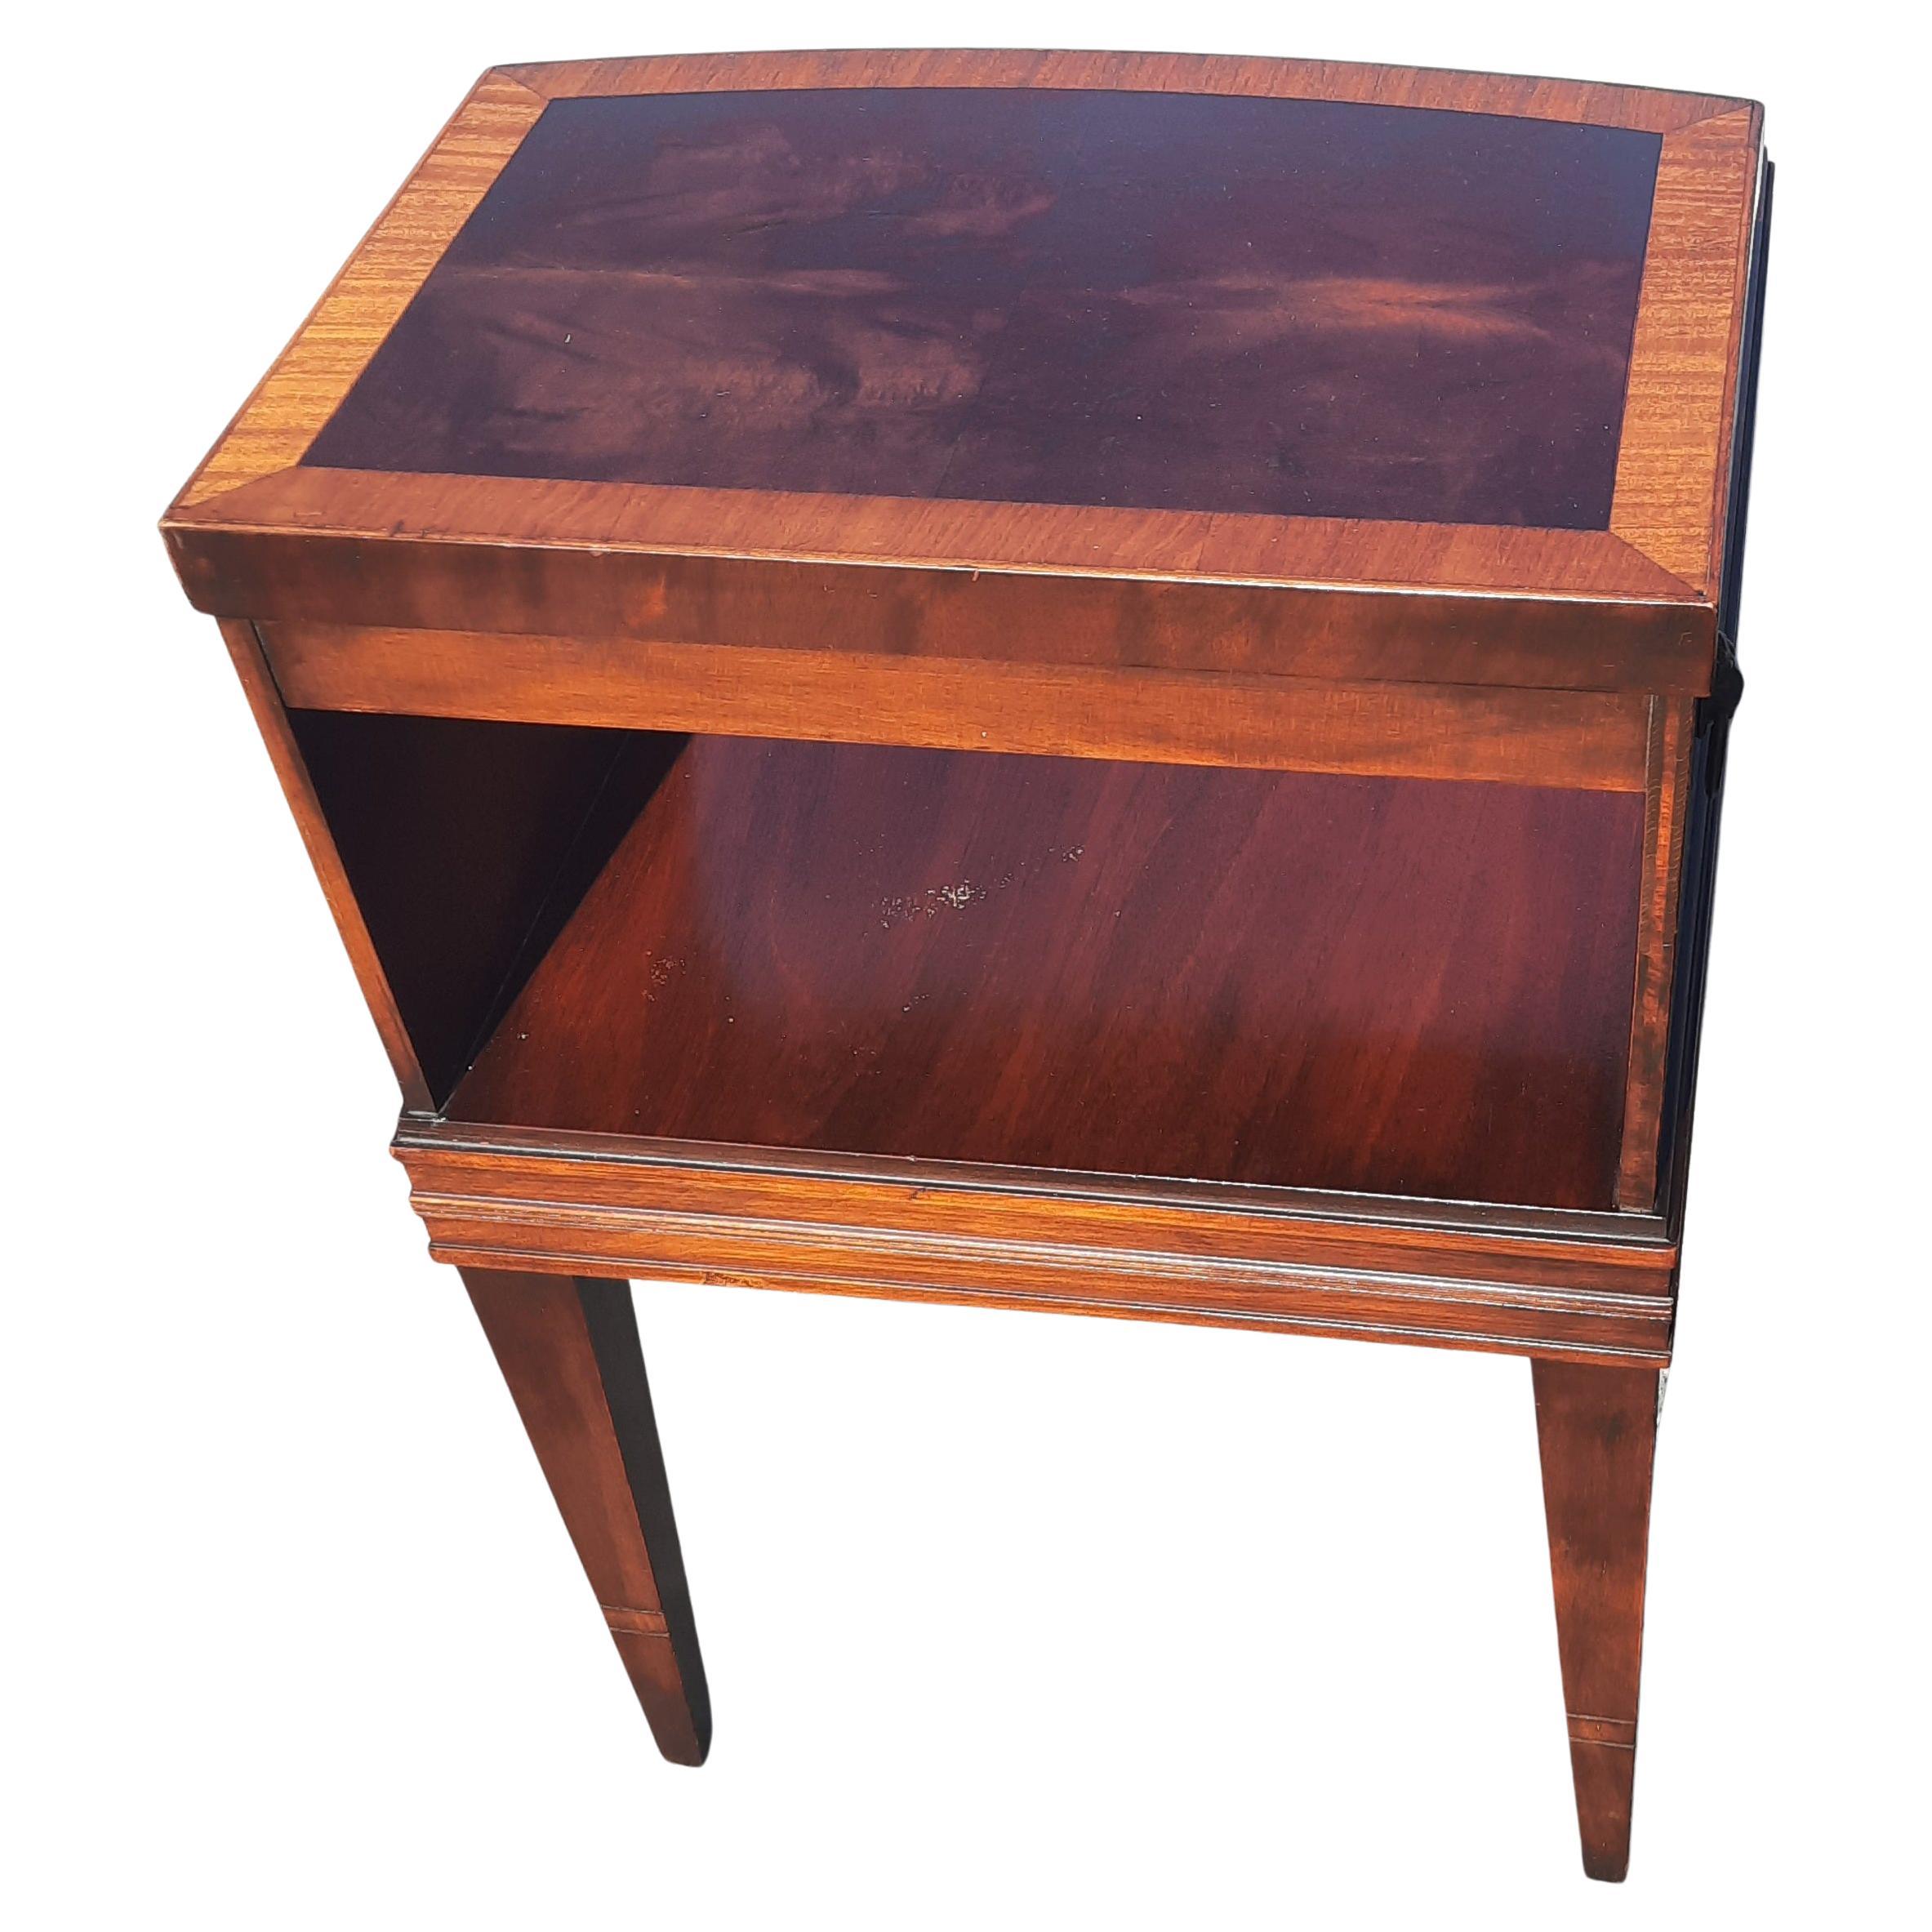 Pair of Lane Acclaim attributed Antique two-tier step up flame mahogany and satinwood banded top side tables. Very good vintage condition. Wear appropriate with age and use. Circa 1930s. See pictures. one of the tables has a 1/3 dimmed ring barely